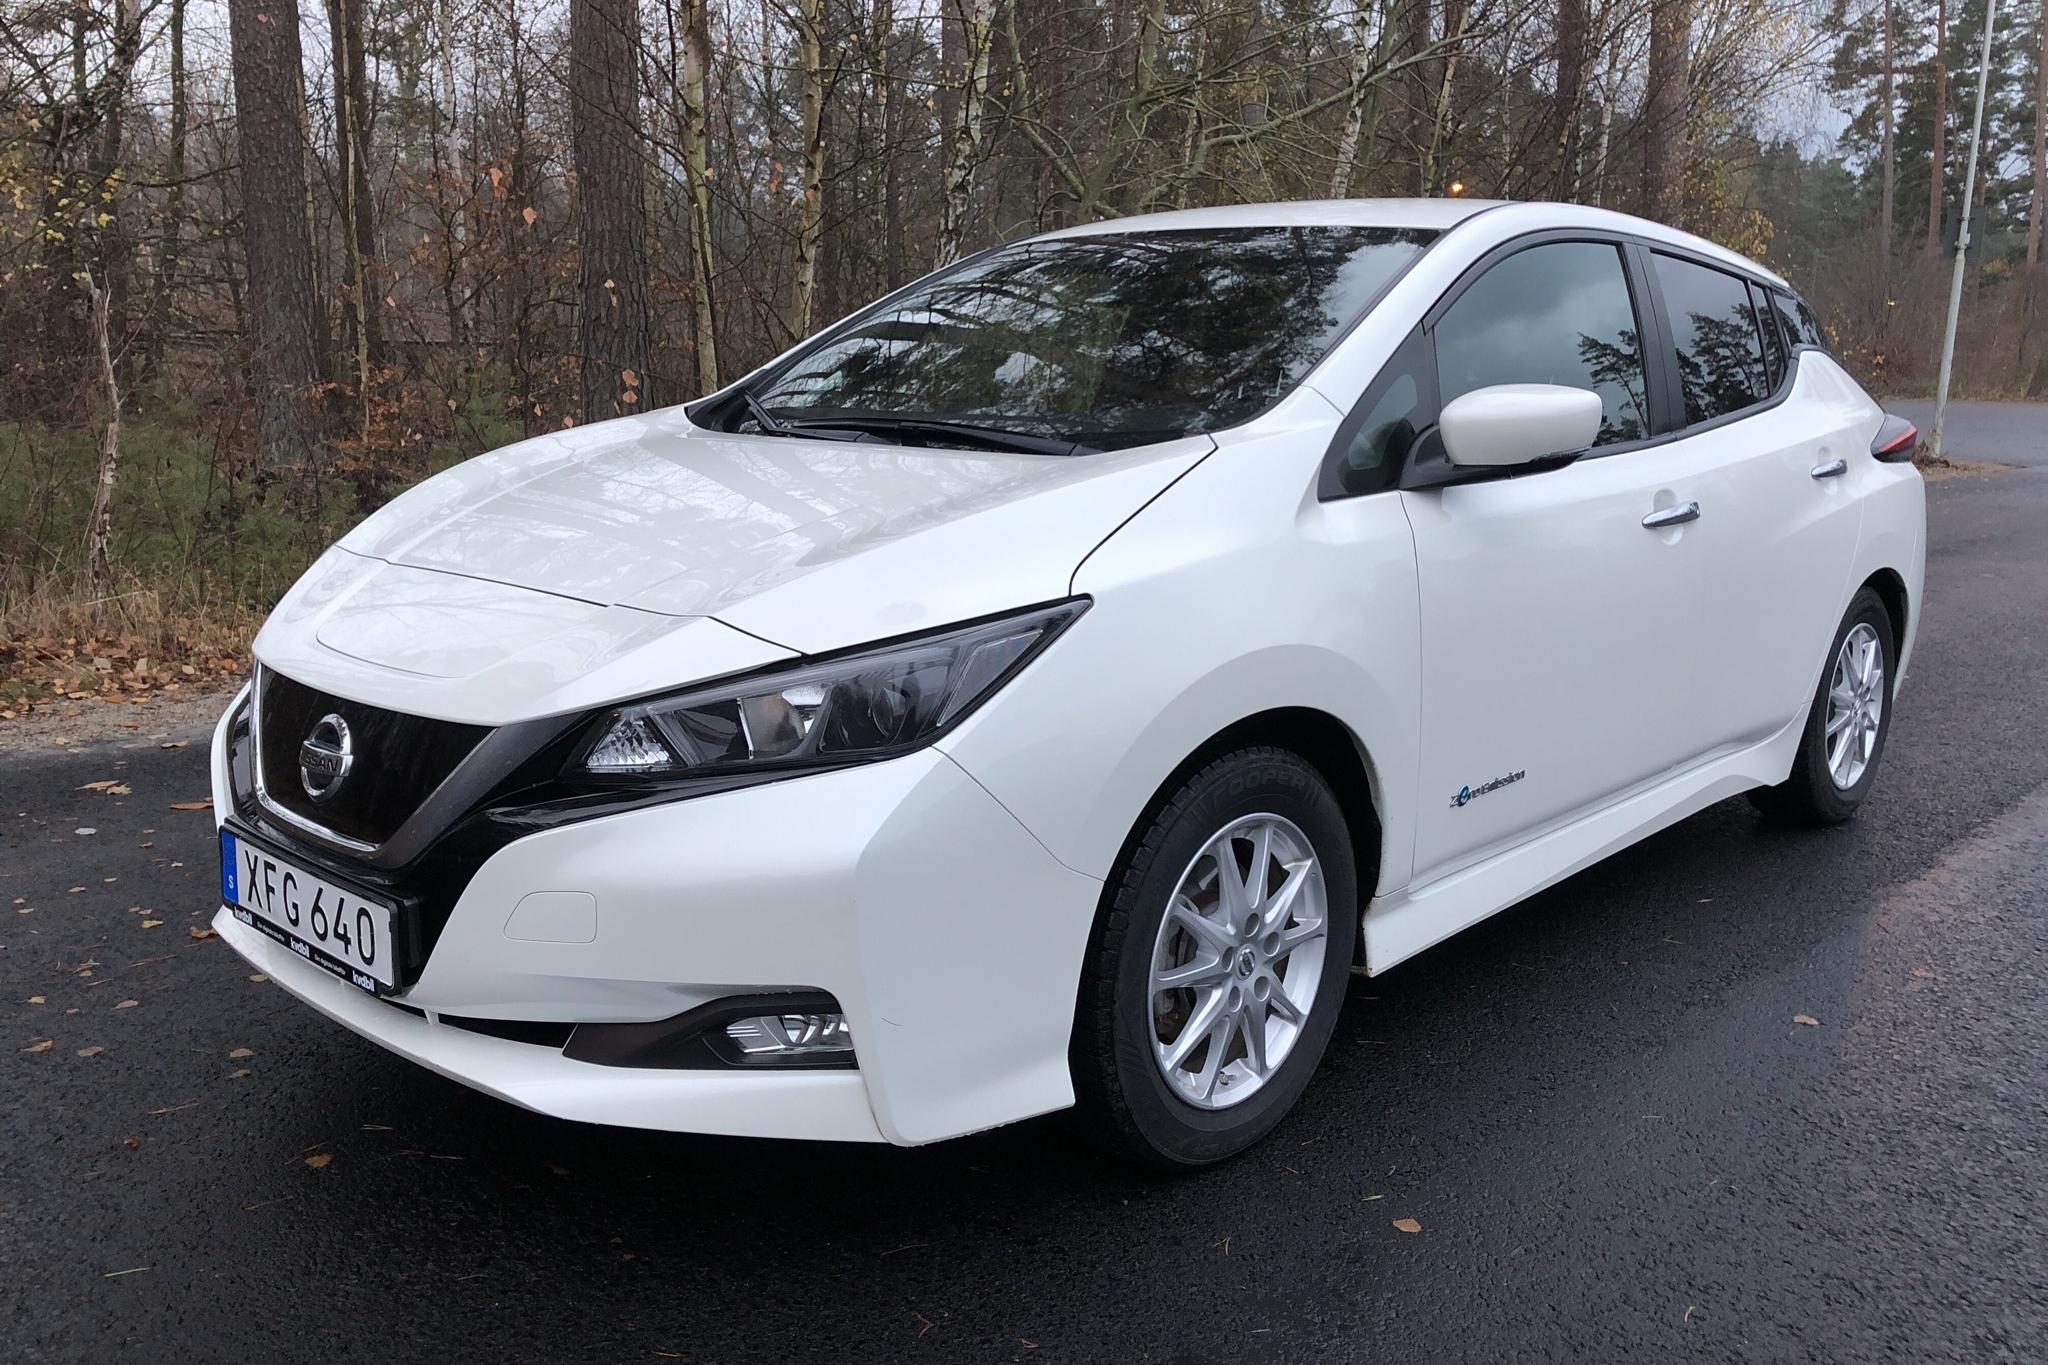 Nissan LEAF 5dr 39 kWh (150hk) - 61 730 km - Automatic - white - 2018